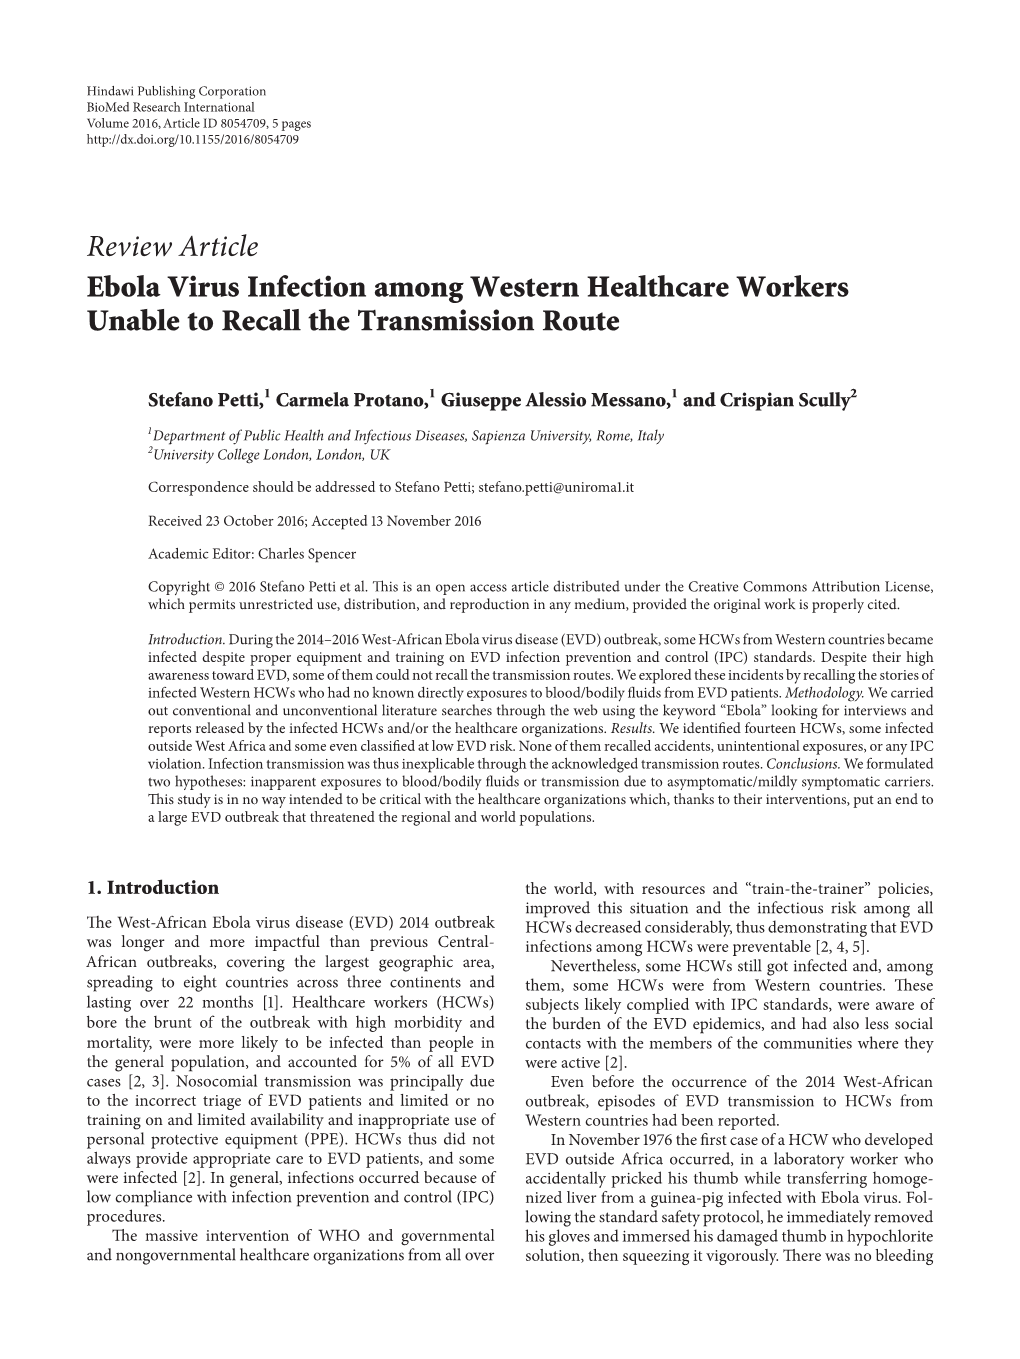 Ebola Virus Infection Among Western Healthcare Workers Unable to Recall the Transmission Route